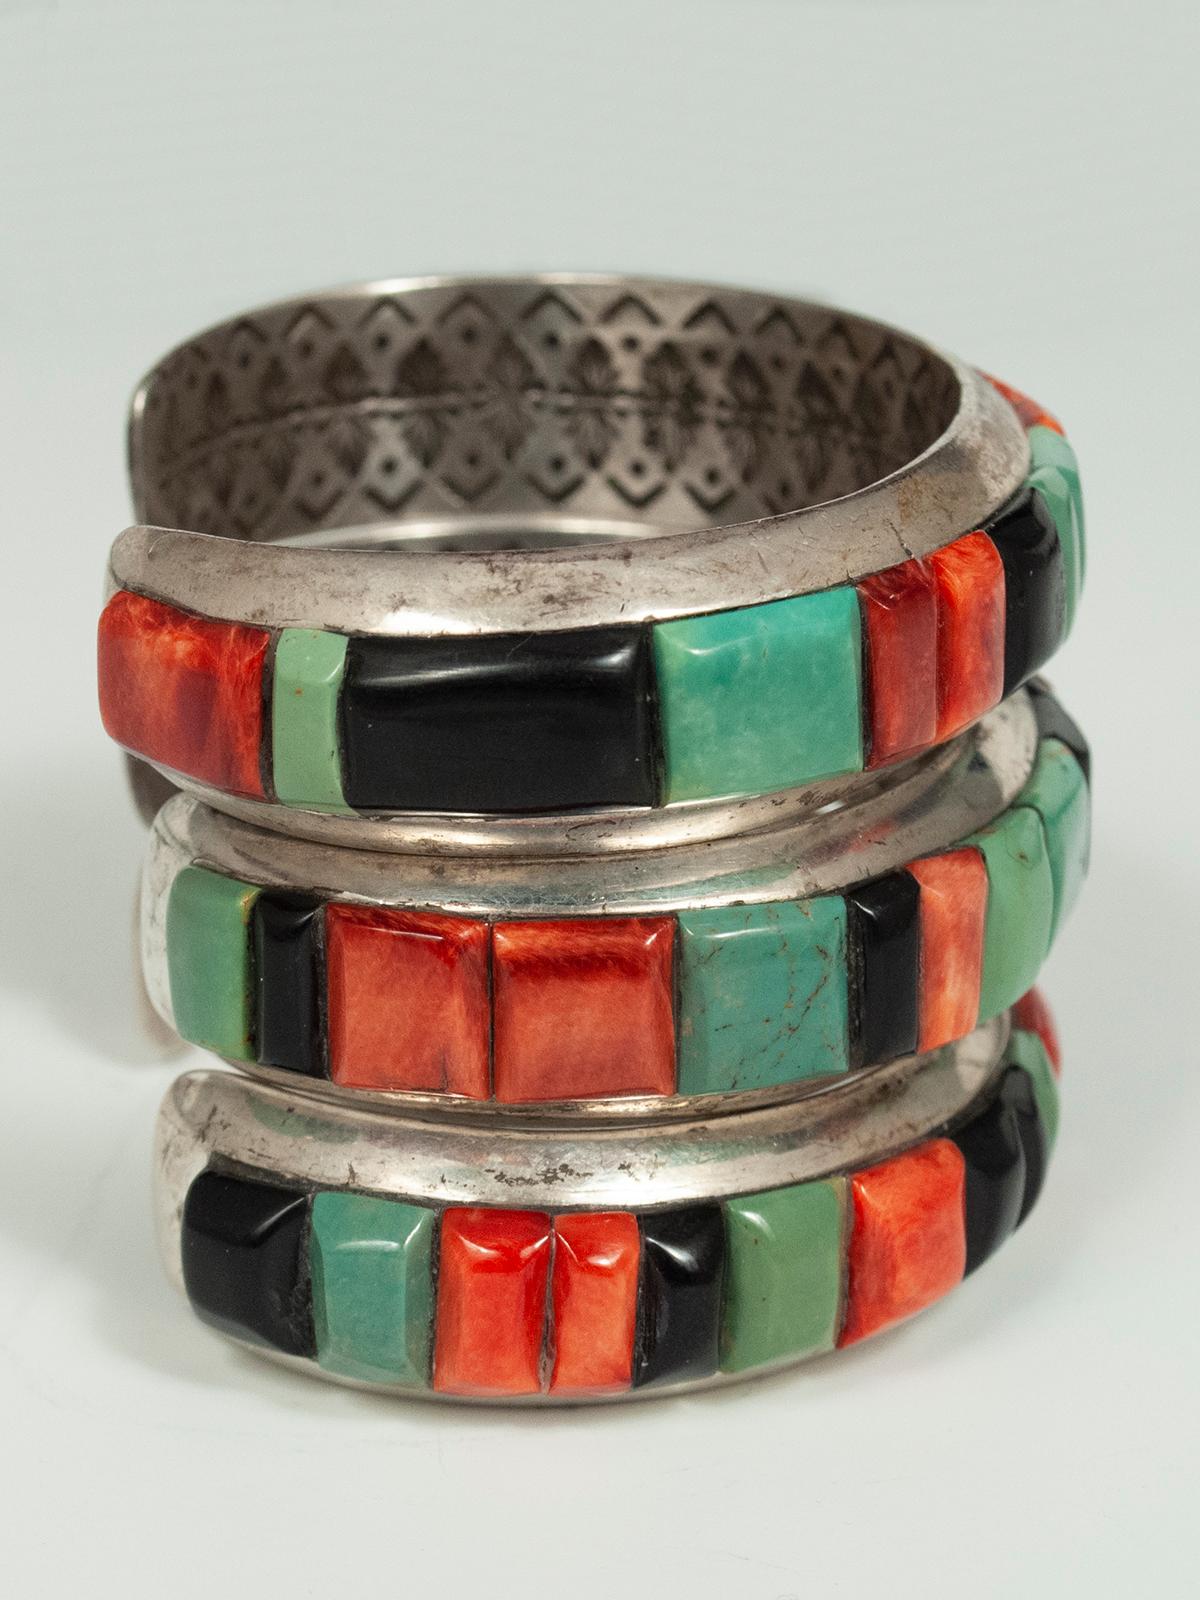 20th century stone and silver bracelets by Ray Adakai, Navajo Jeweler

Each of these colorful silver bracelets has a channel set with rectangular cut spiny oyster shell, turquoise and black onyx cabochons. Master jeweler Ray Adakai is the son of